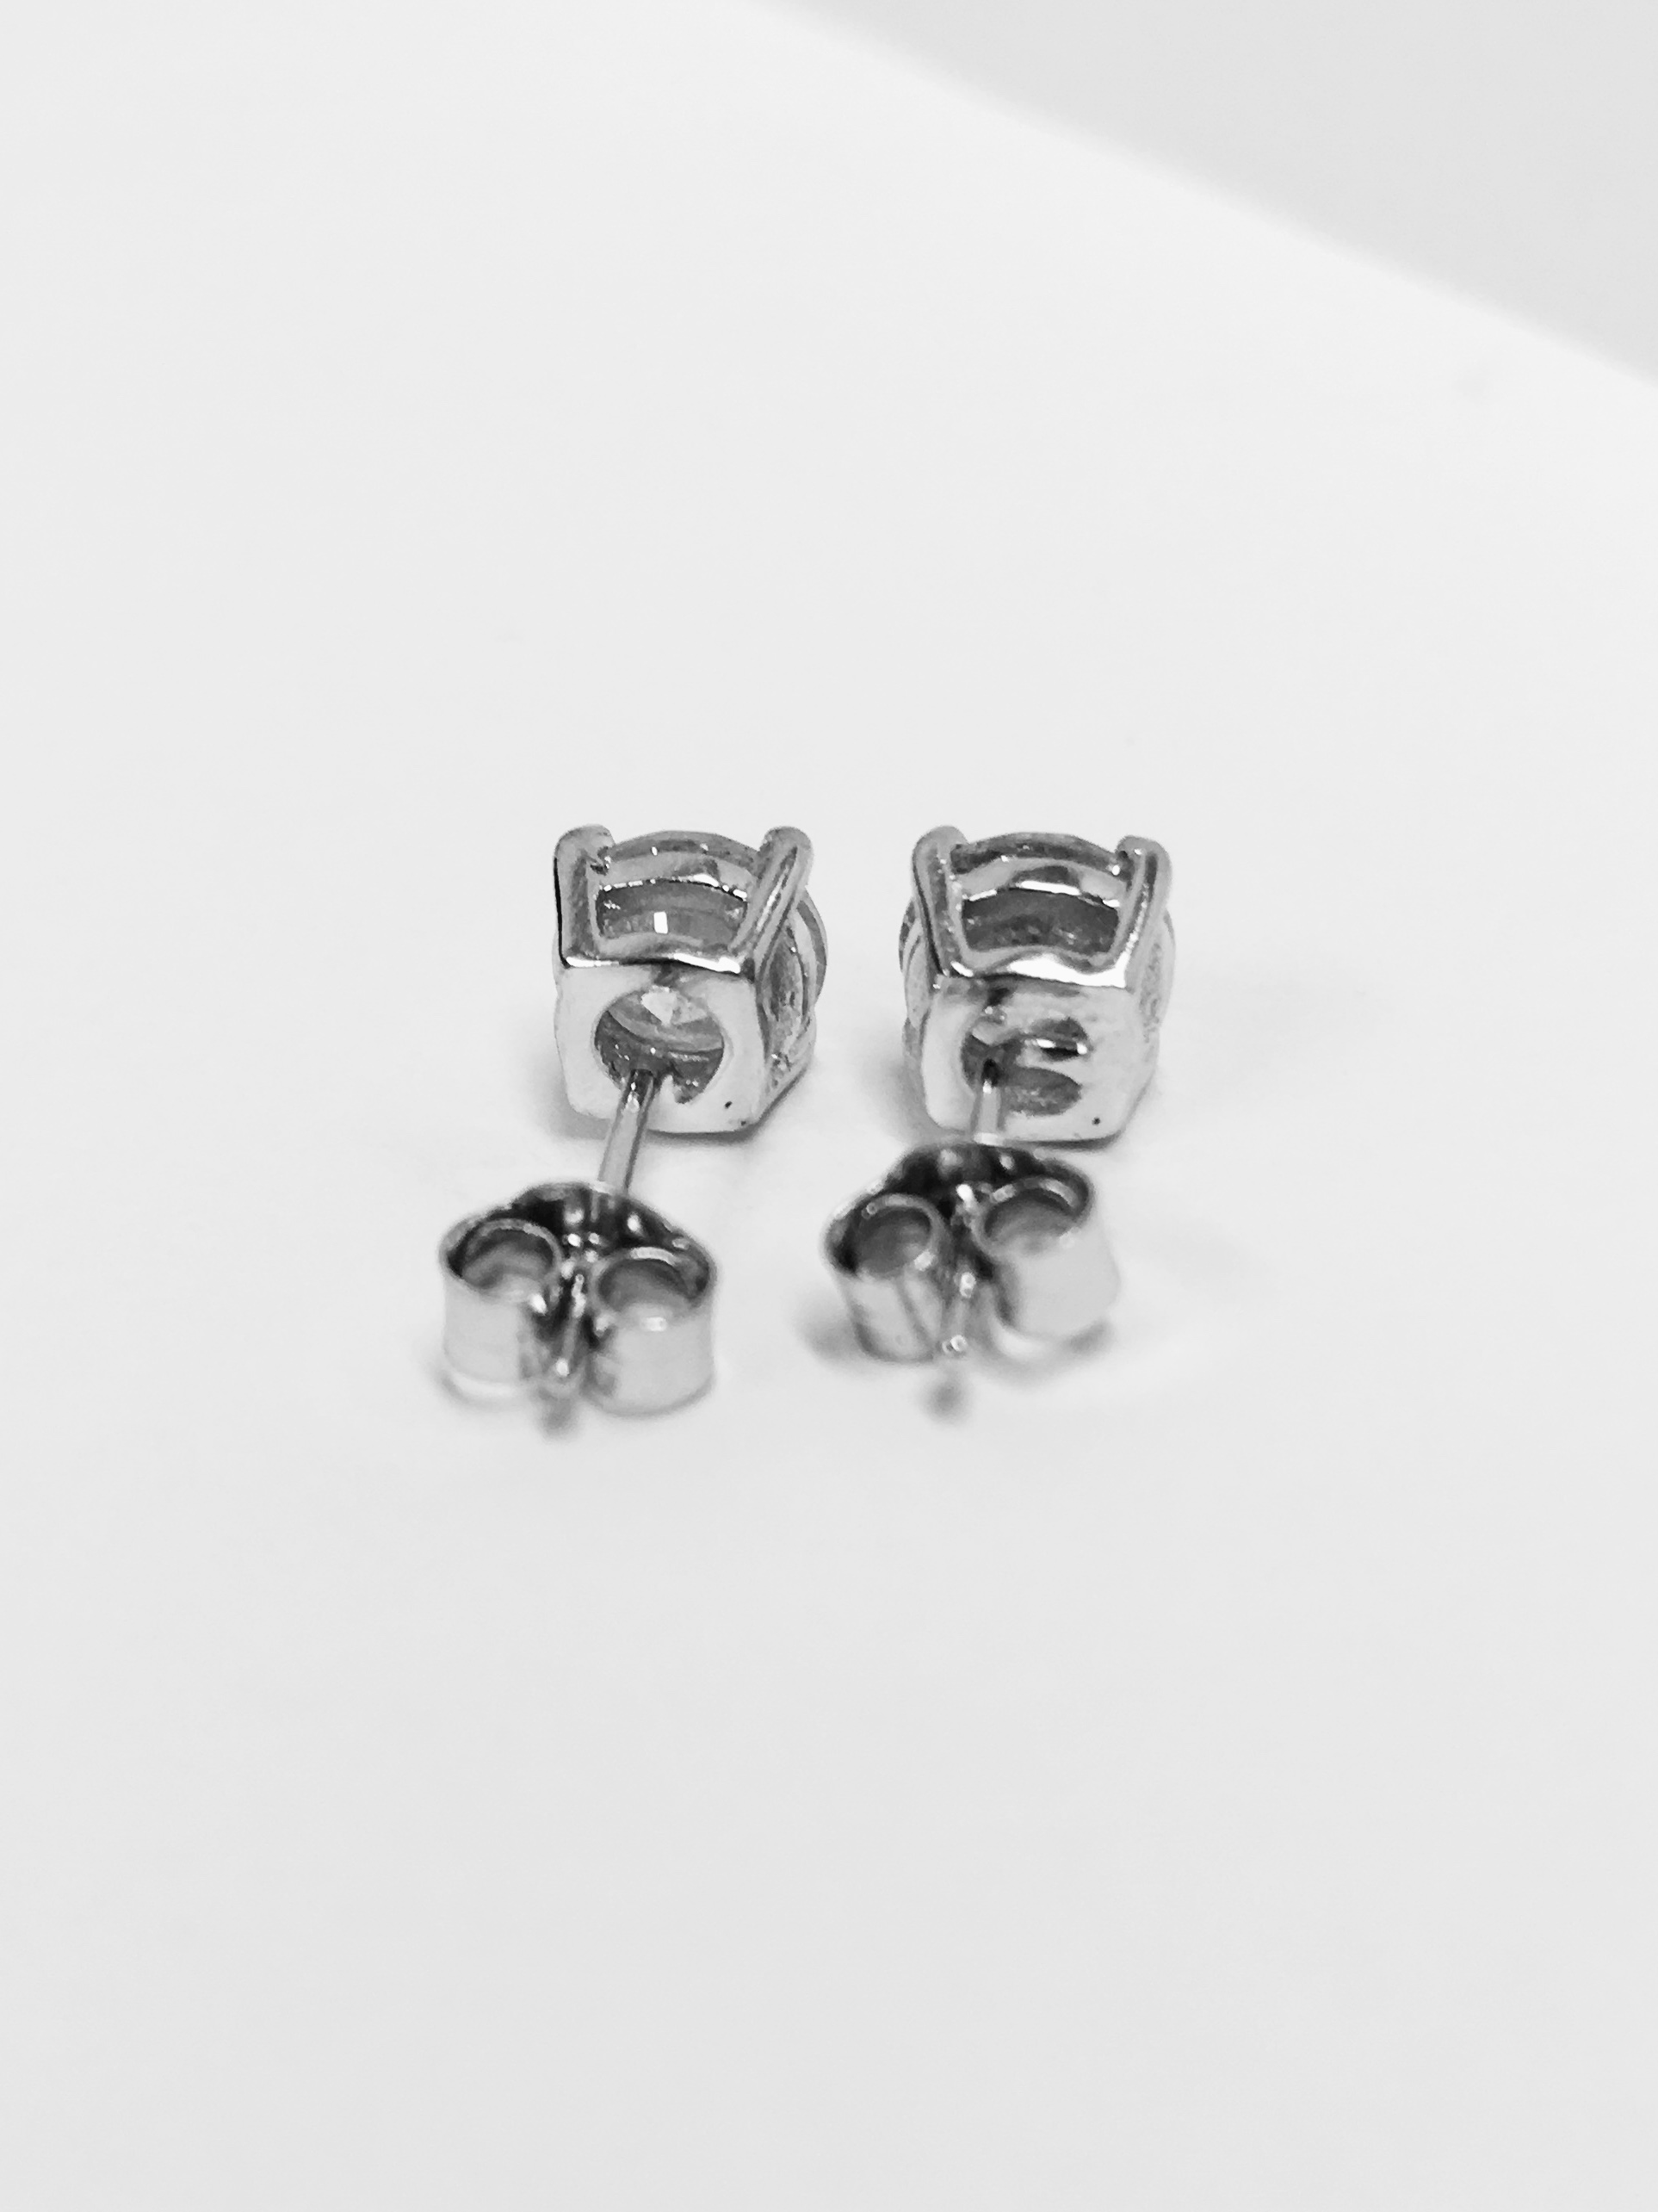 1ct diamond solitaire earrings - Image 18 of 24